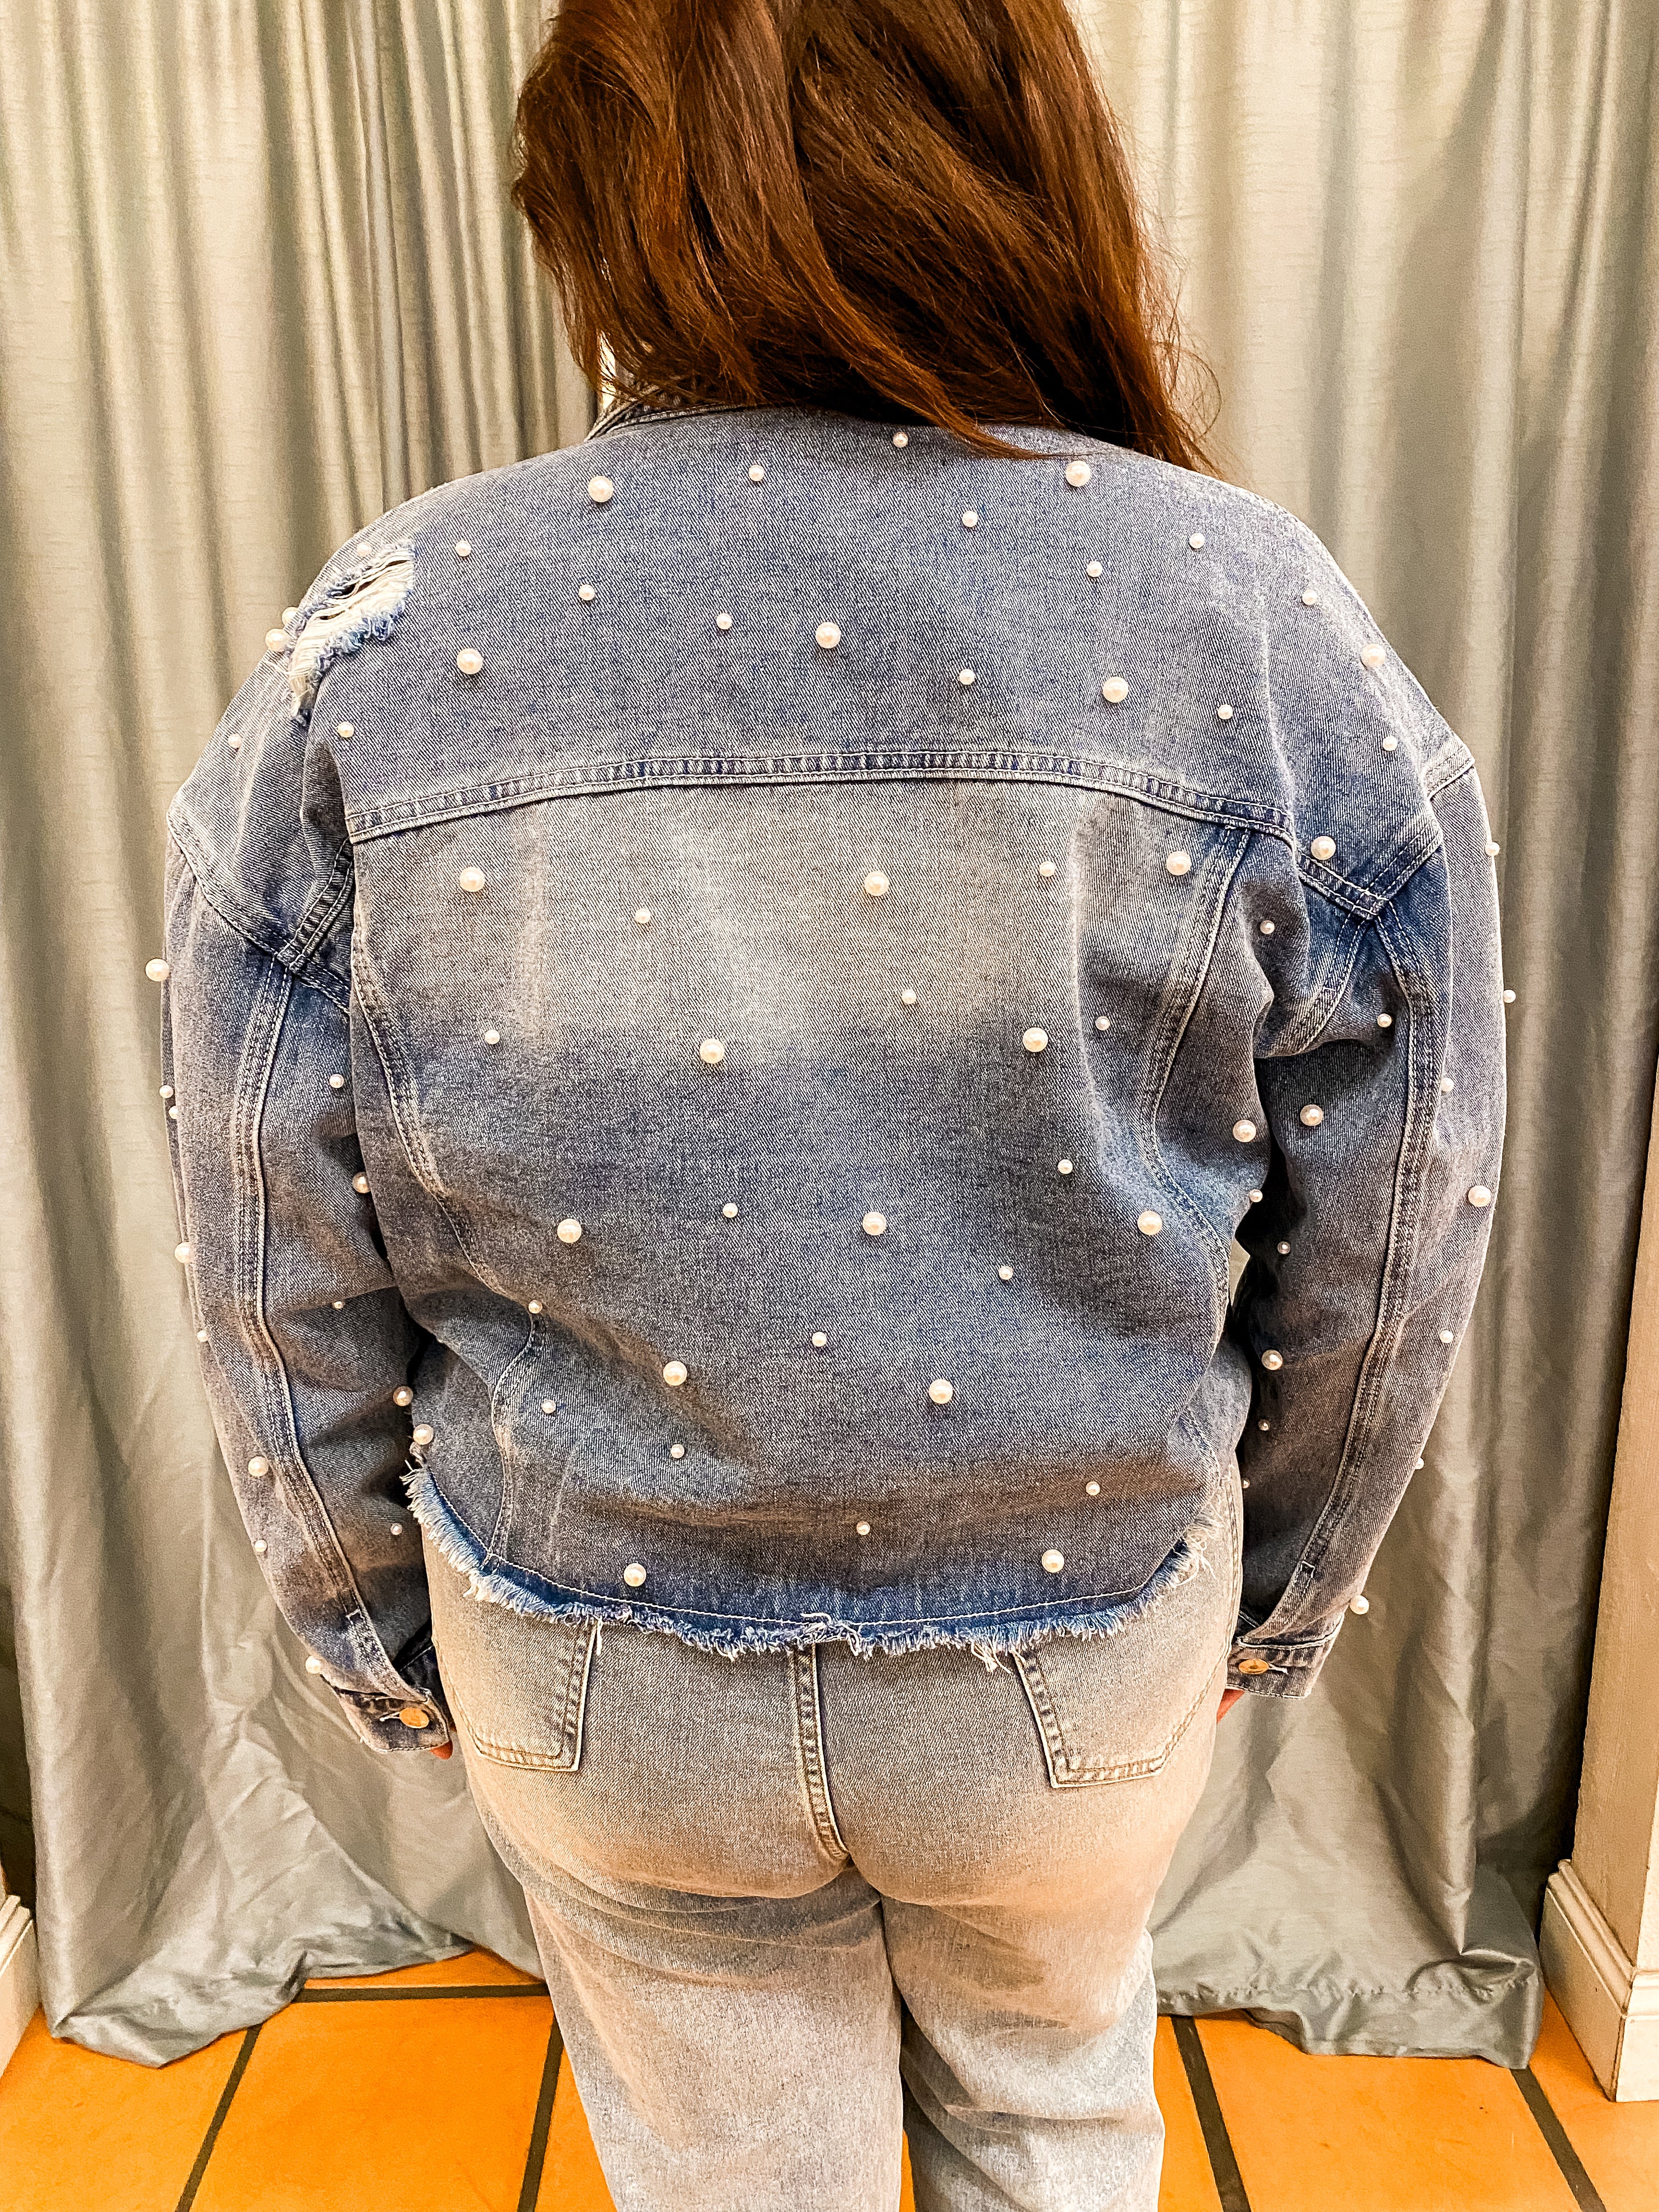 Pearl Embellished Ripped Button Down Denim Jacket